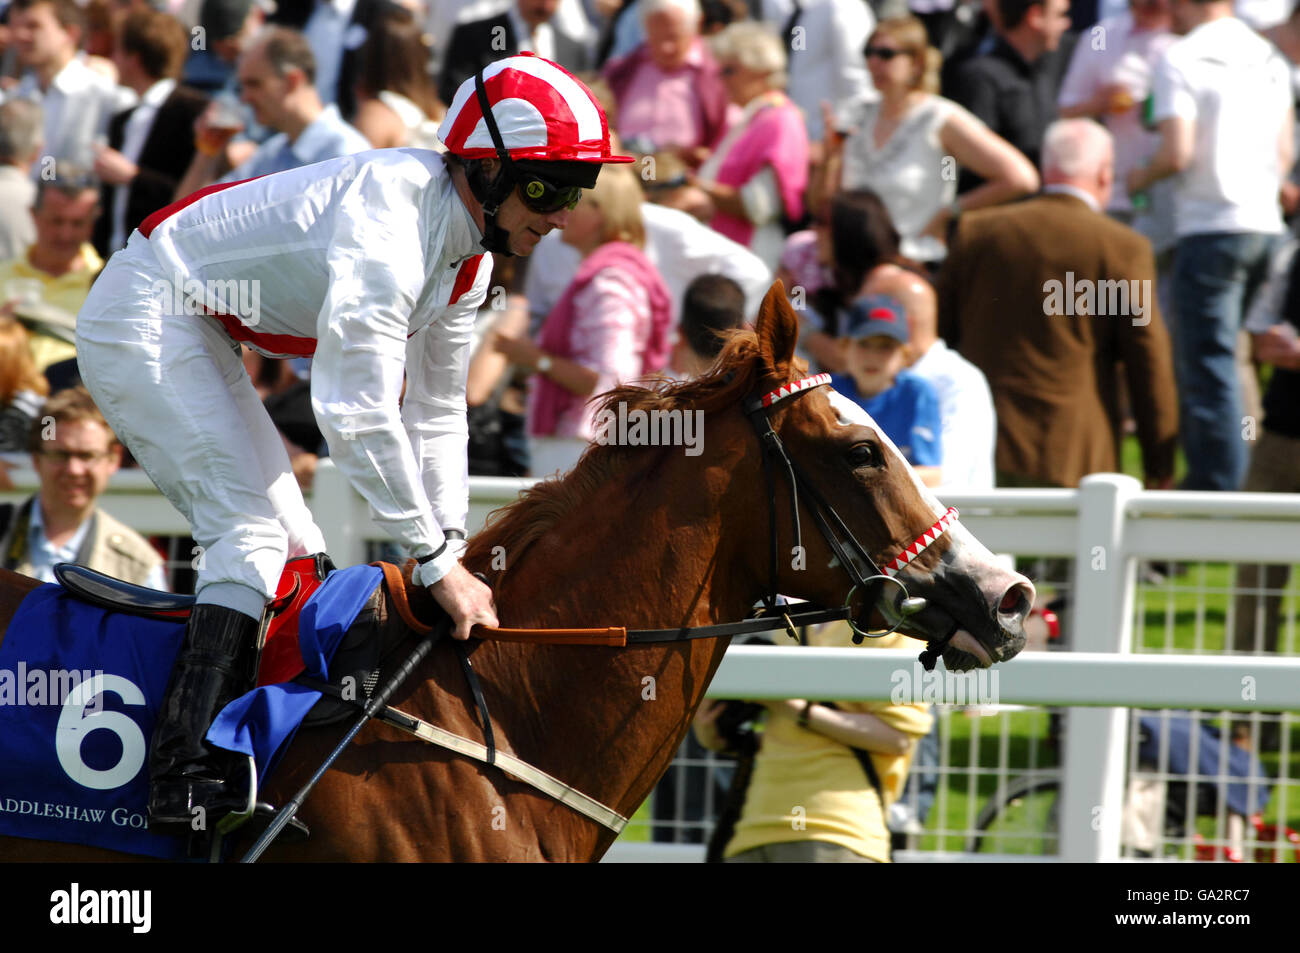 Horse Racing - The Coral-Eclipse Day - Sandown Park Racecourse. Guarantia, ridden by jockey Joe Fanning in the parade ring before the Addleshaw Goddard Distaff Stakes at the Sandown Racecourse, Surrey. Stock Photo